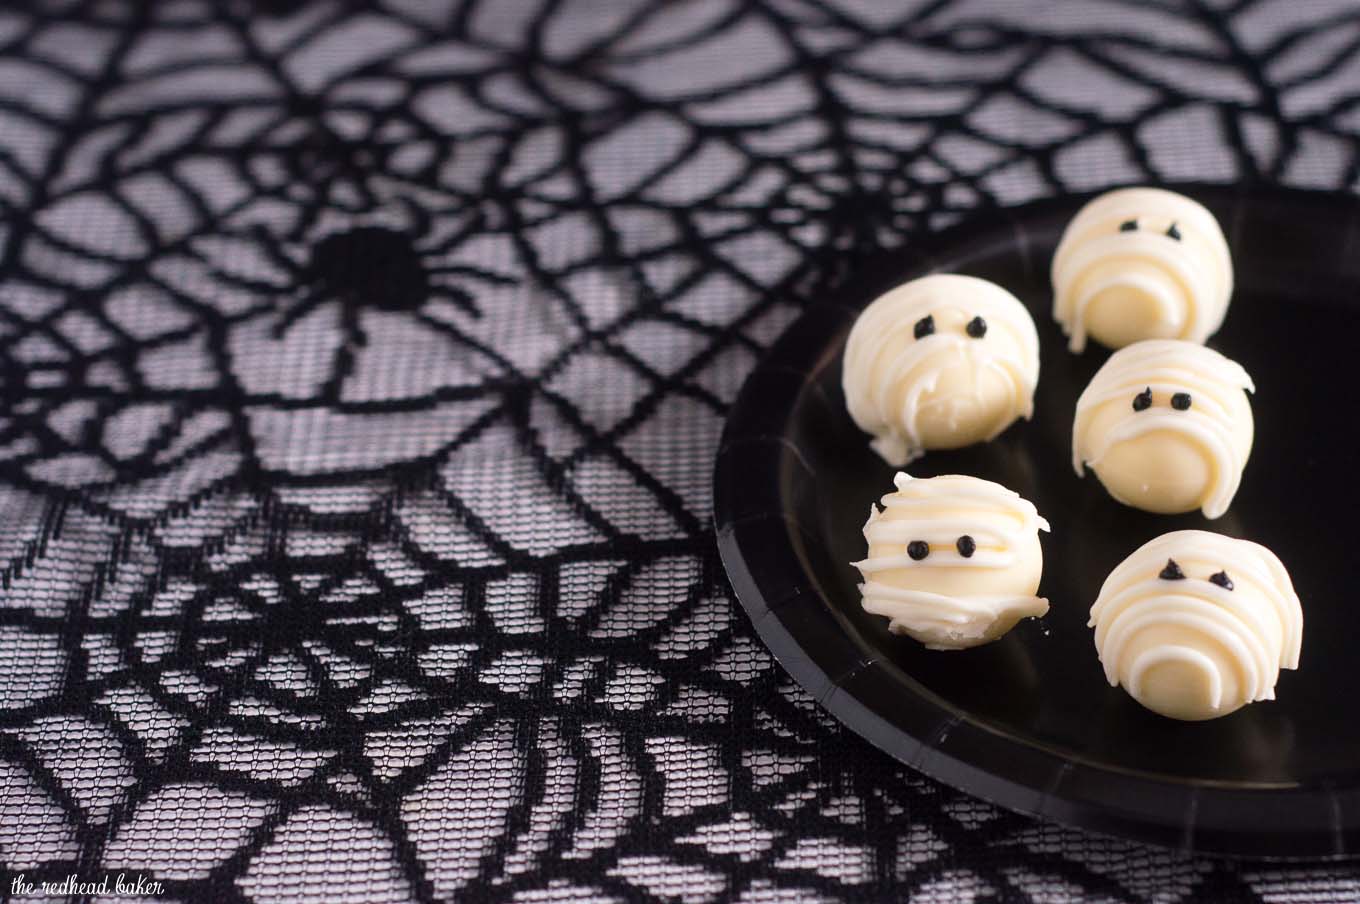 Boo! Scare your Halloween dinner or party guests with these easy-to-make white chocolate mummy truffles made with white chocolate ganache! #ProgressiveEats